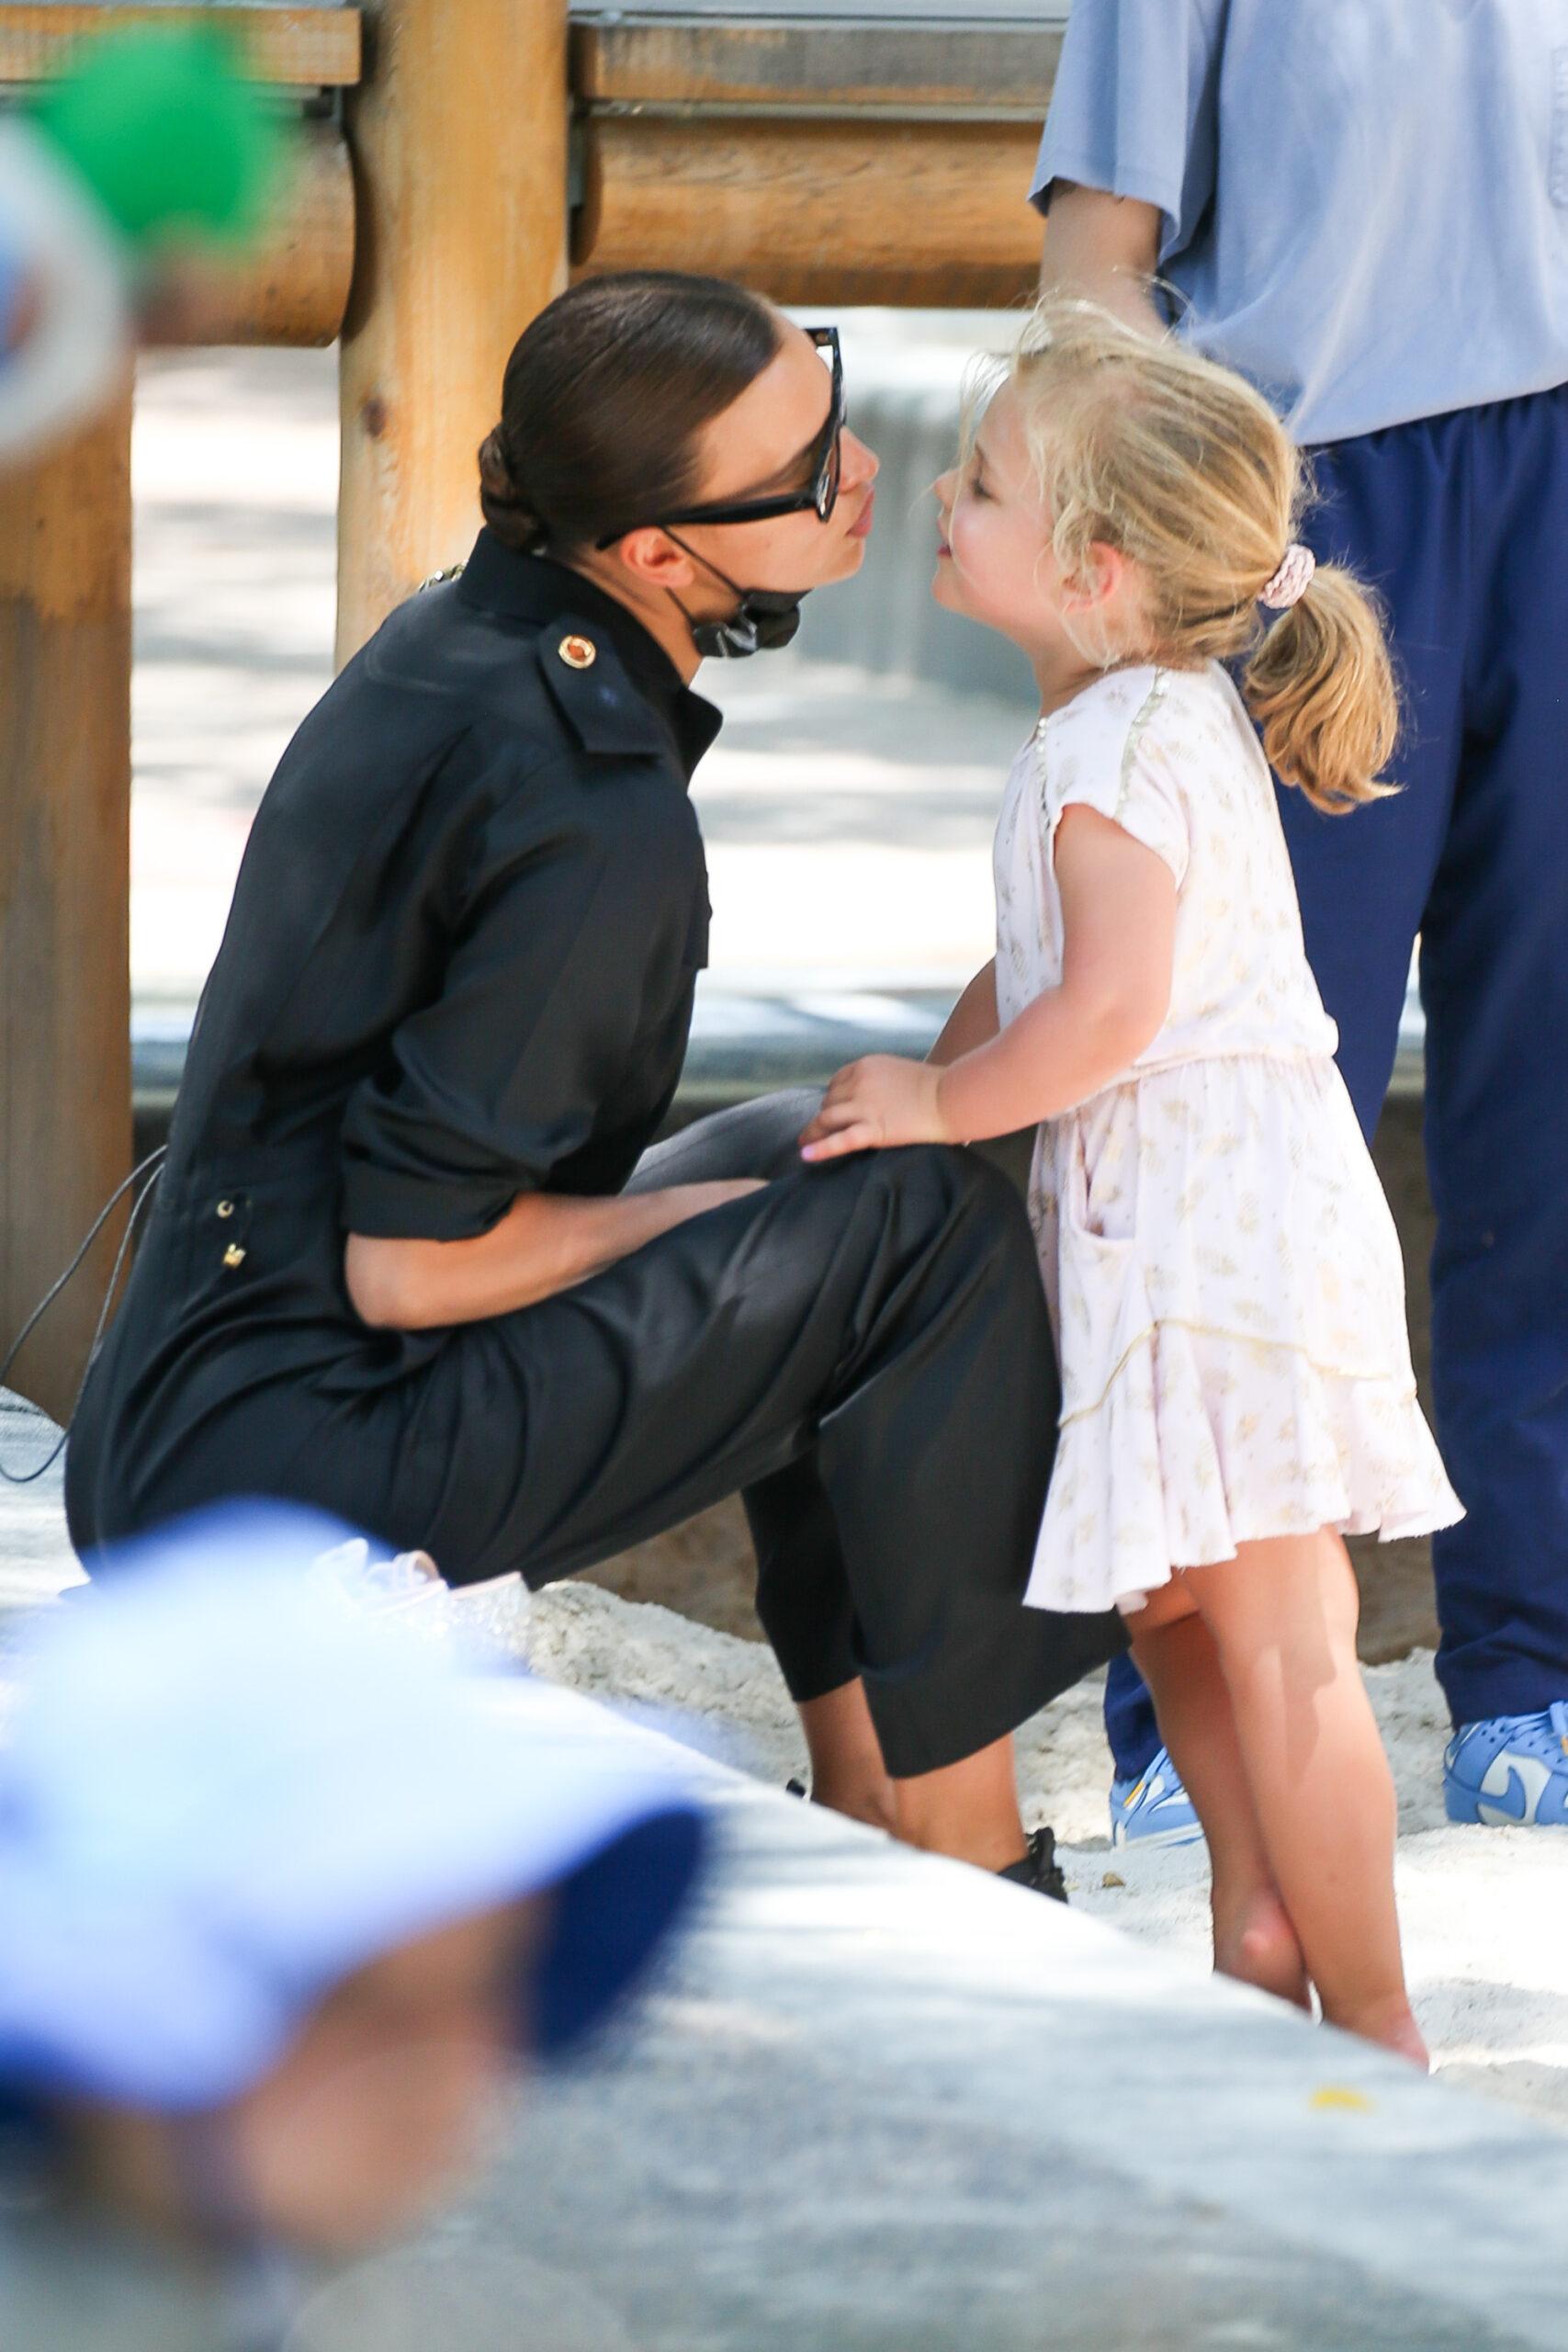 Irina Shayk and her daughter Lea De Seine Shayk Cooper seen having a quality time at the playground in NYC